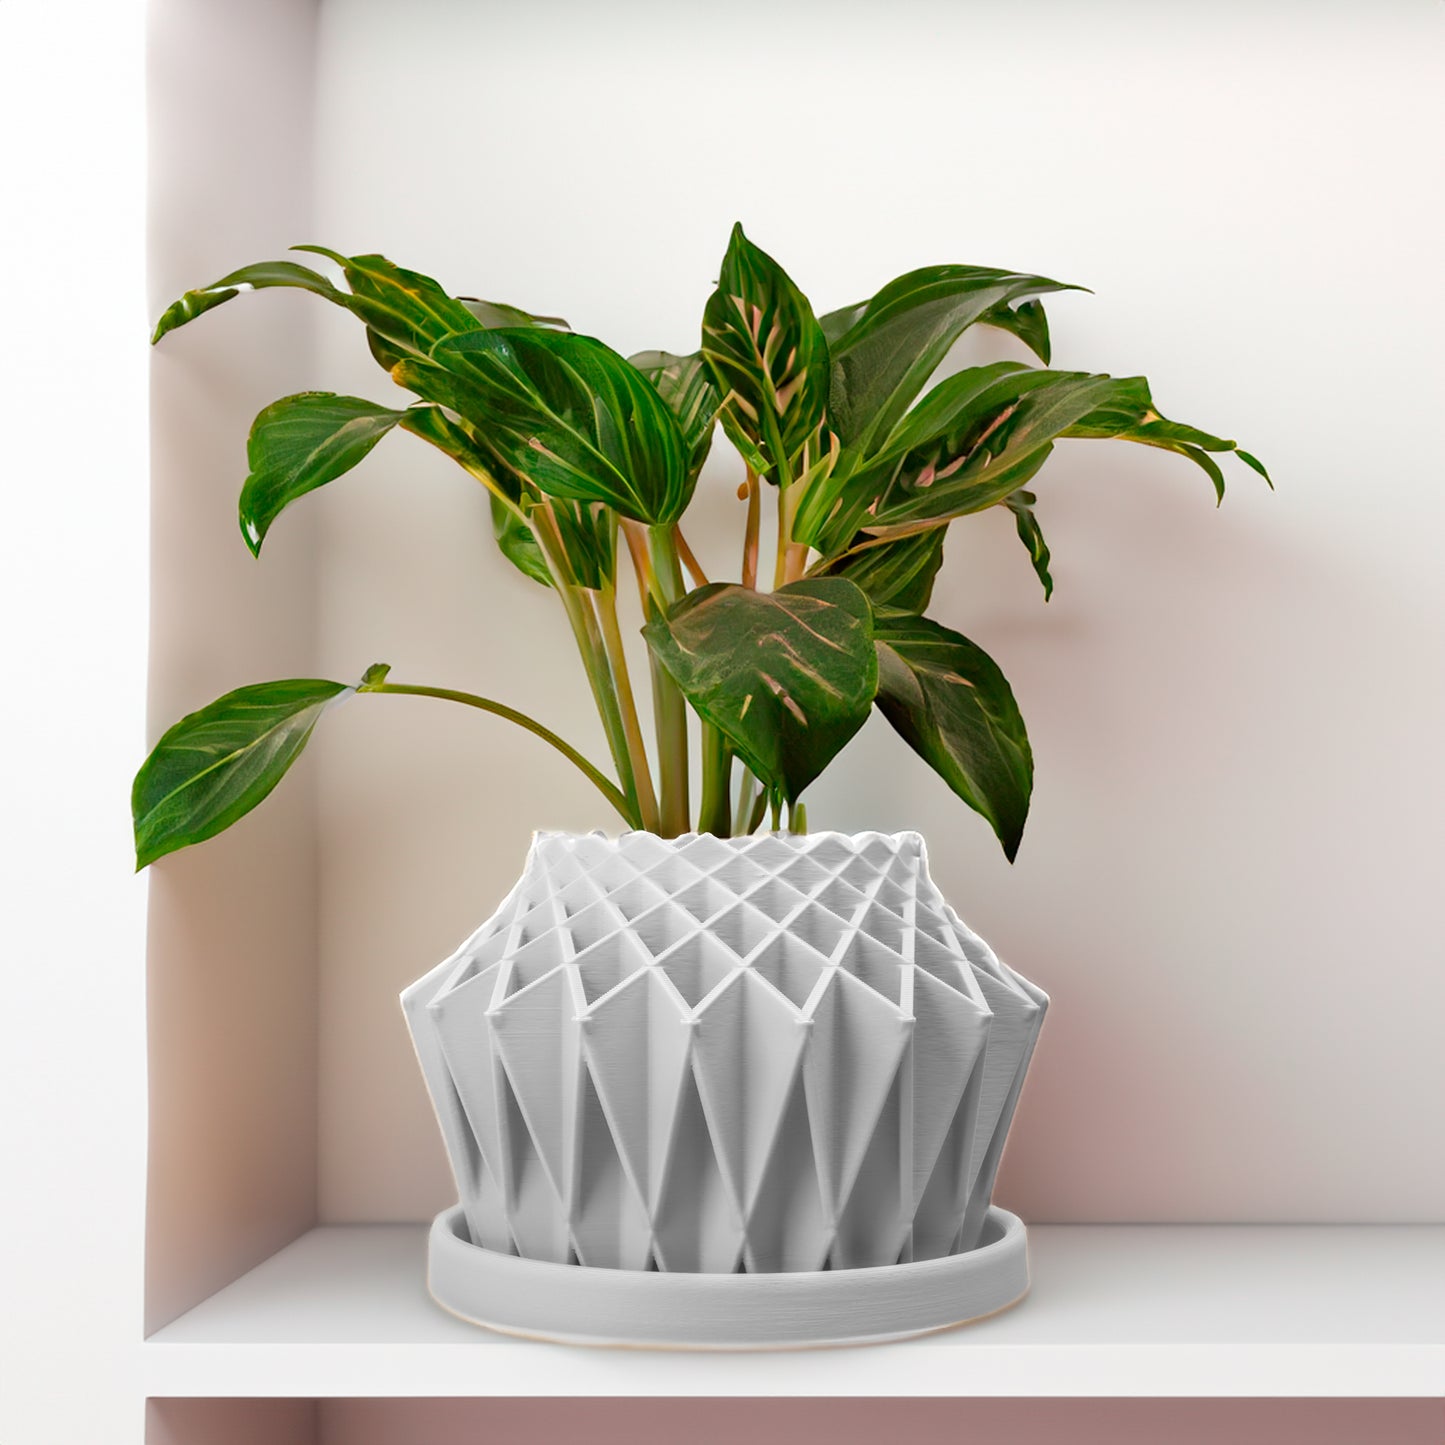 Galaxy Groove, Cute Plant Pot with Drainage and Saucer, Bonsai Planter Pot Unique, Cacti and House Plant Planter, Lightweight Modern Art Decor